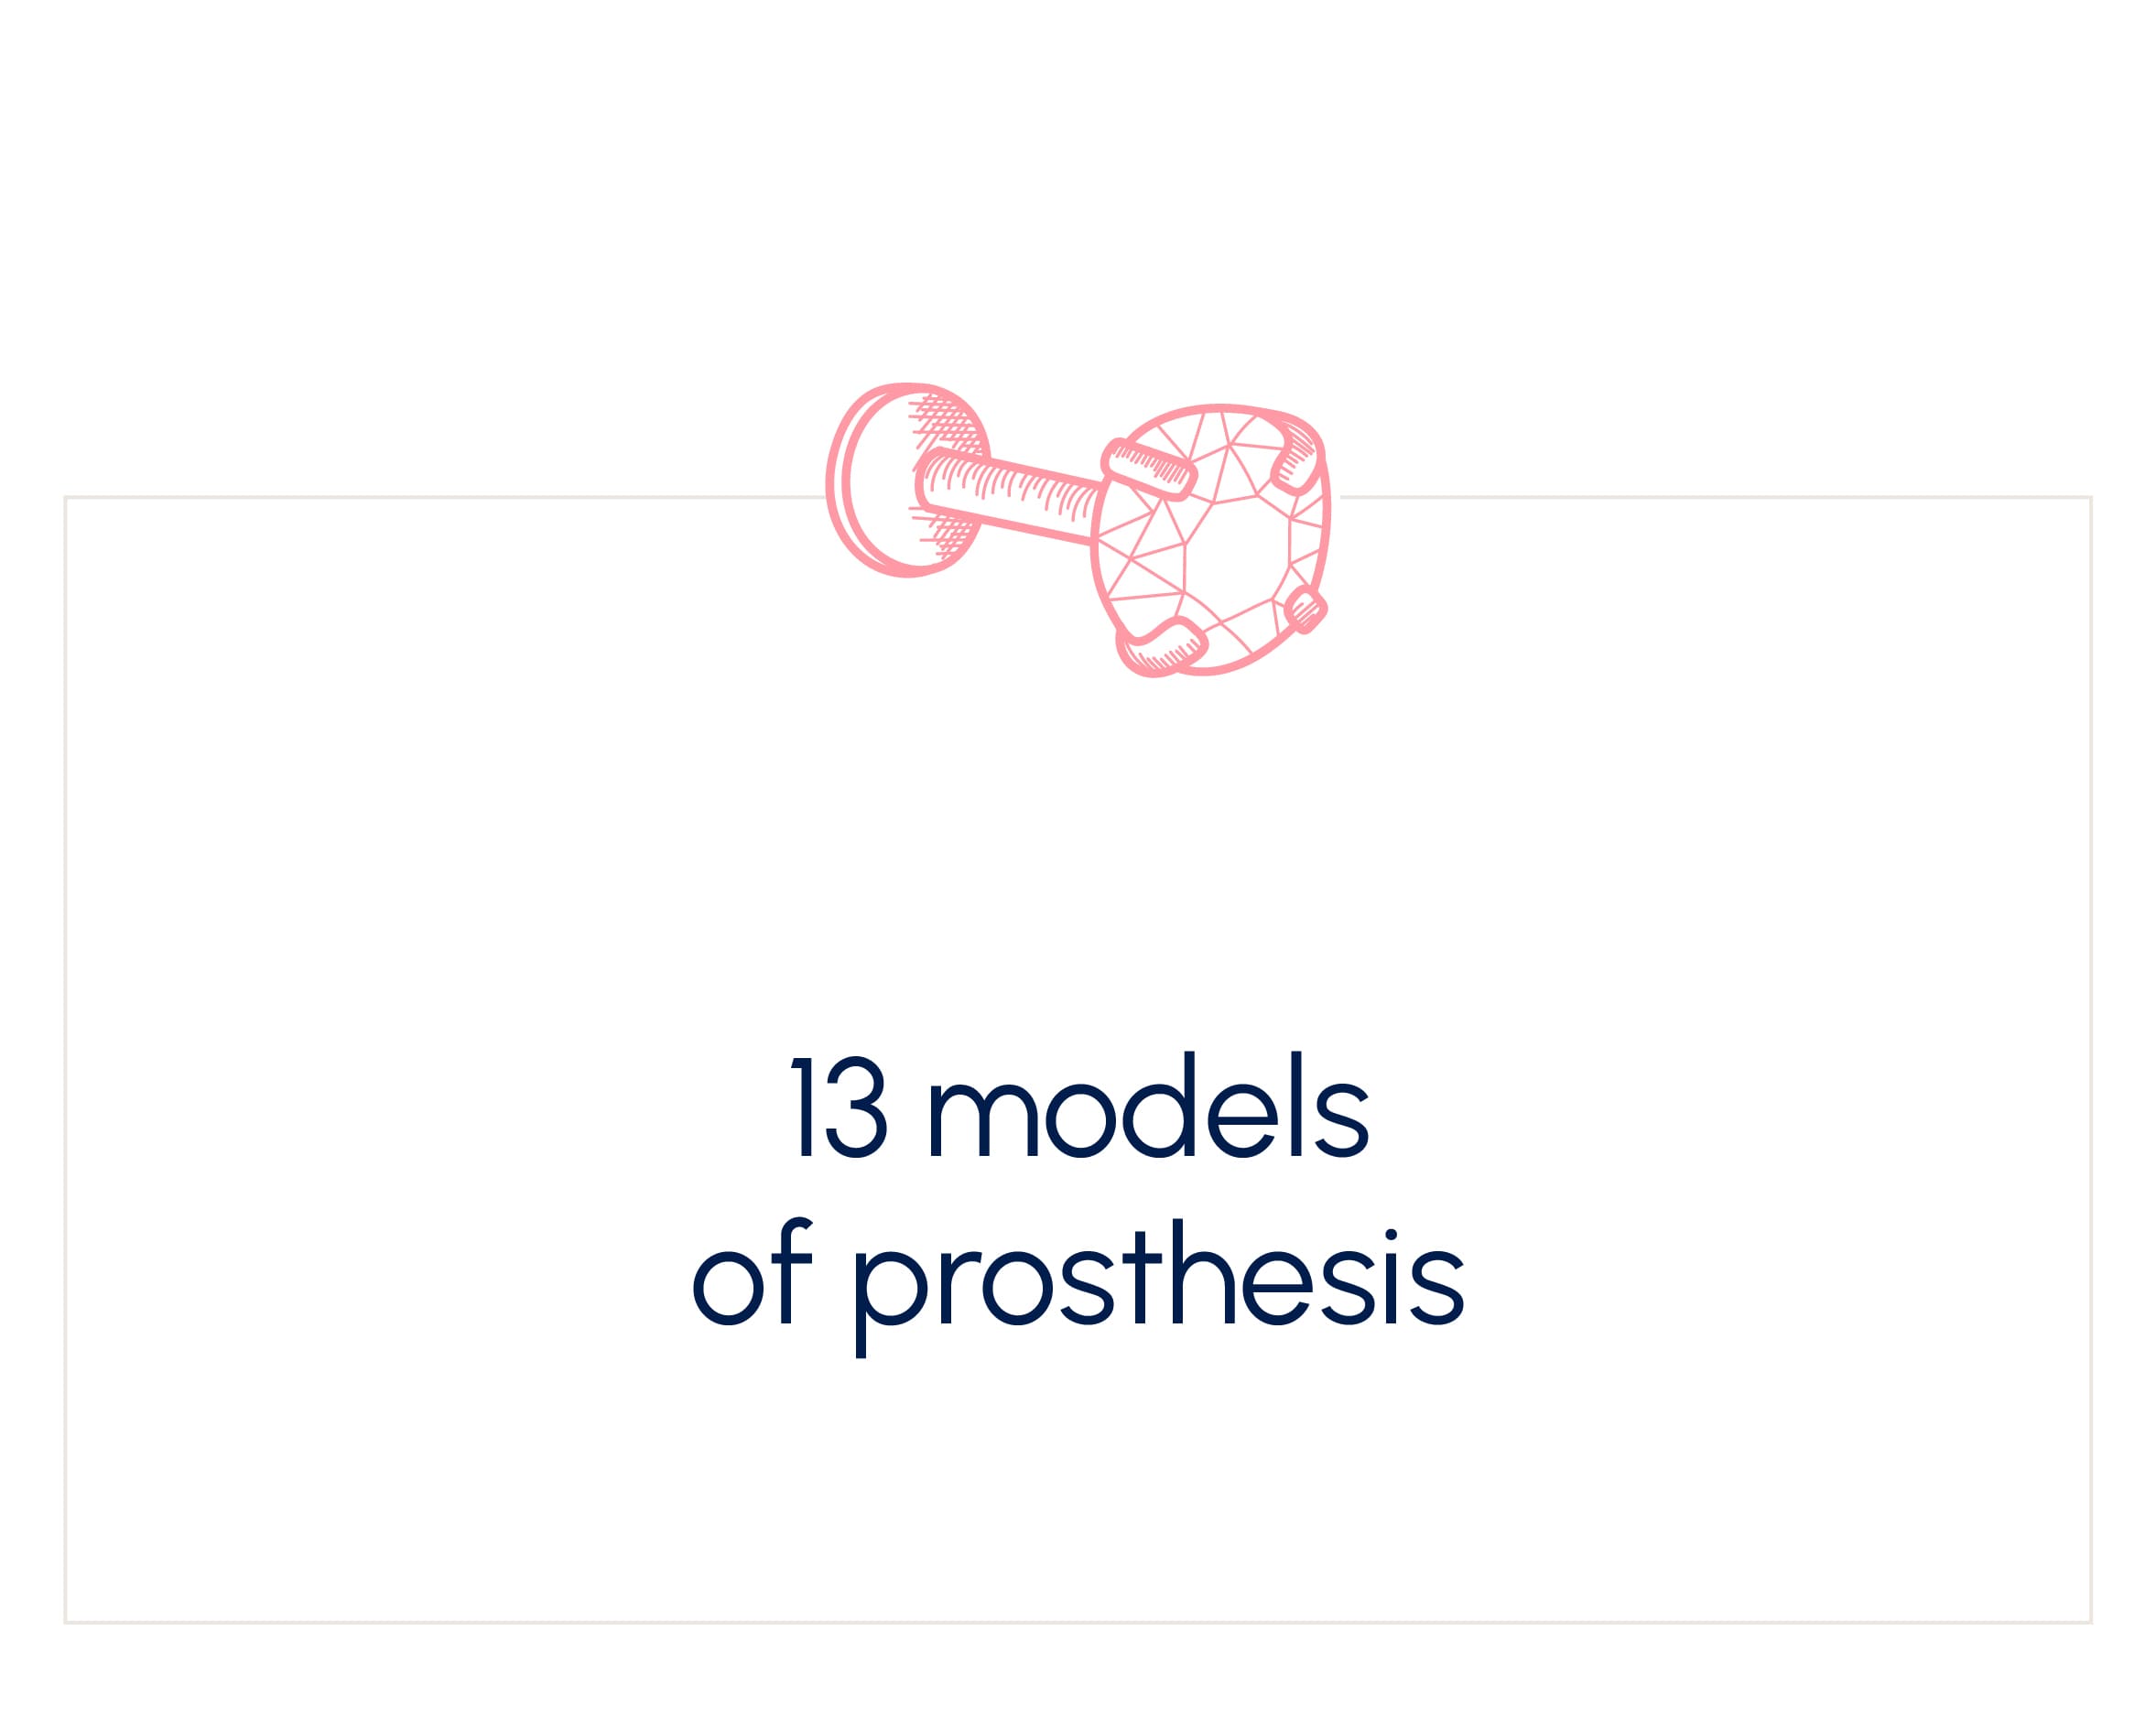 13 models of prosthesis